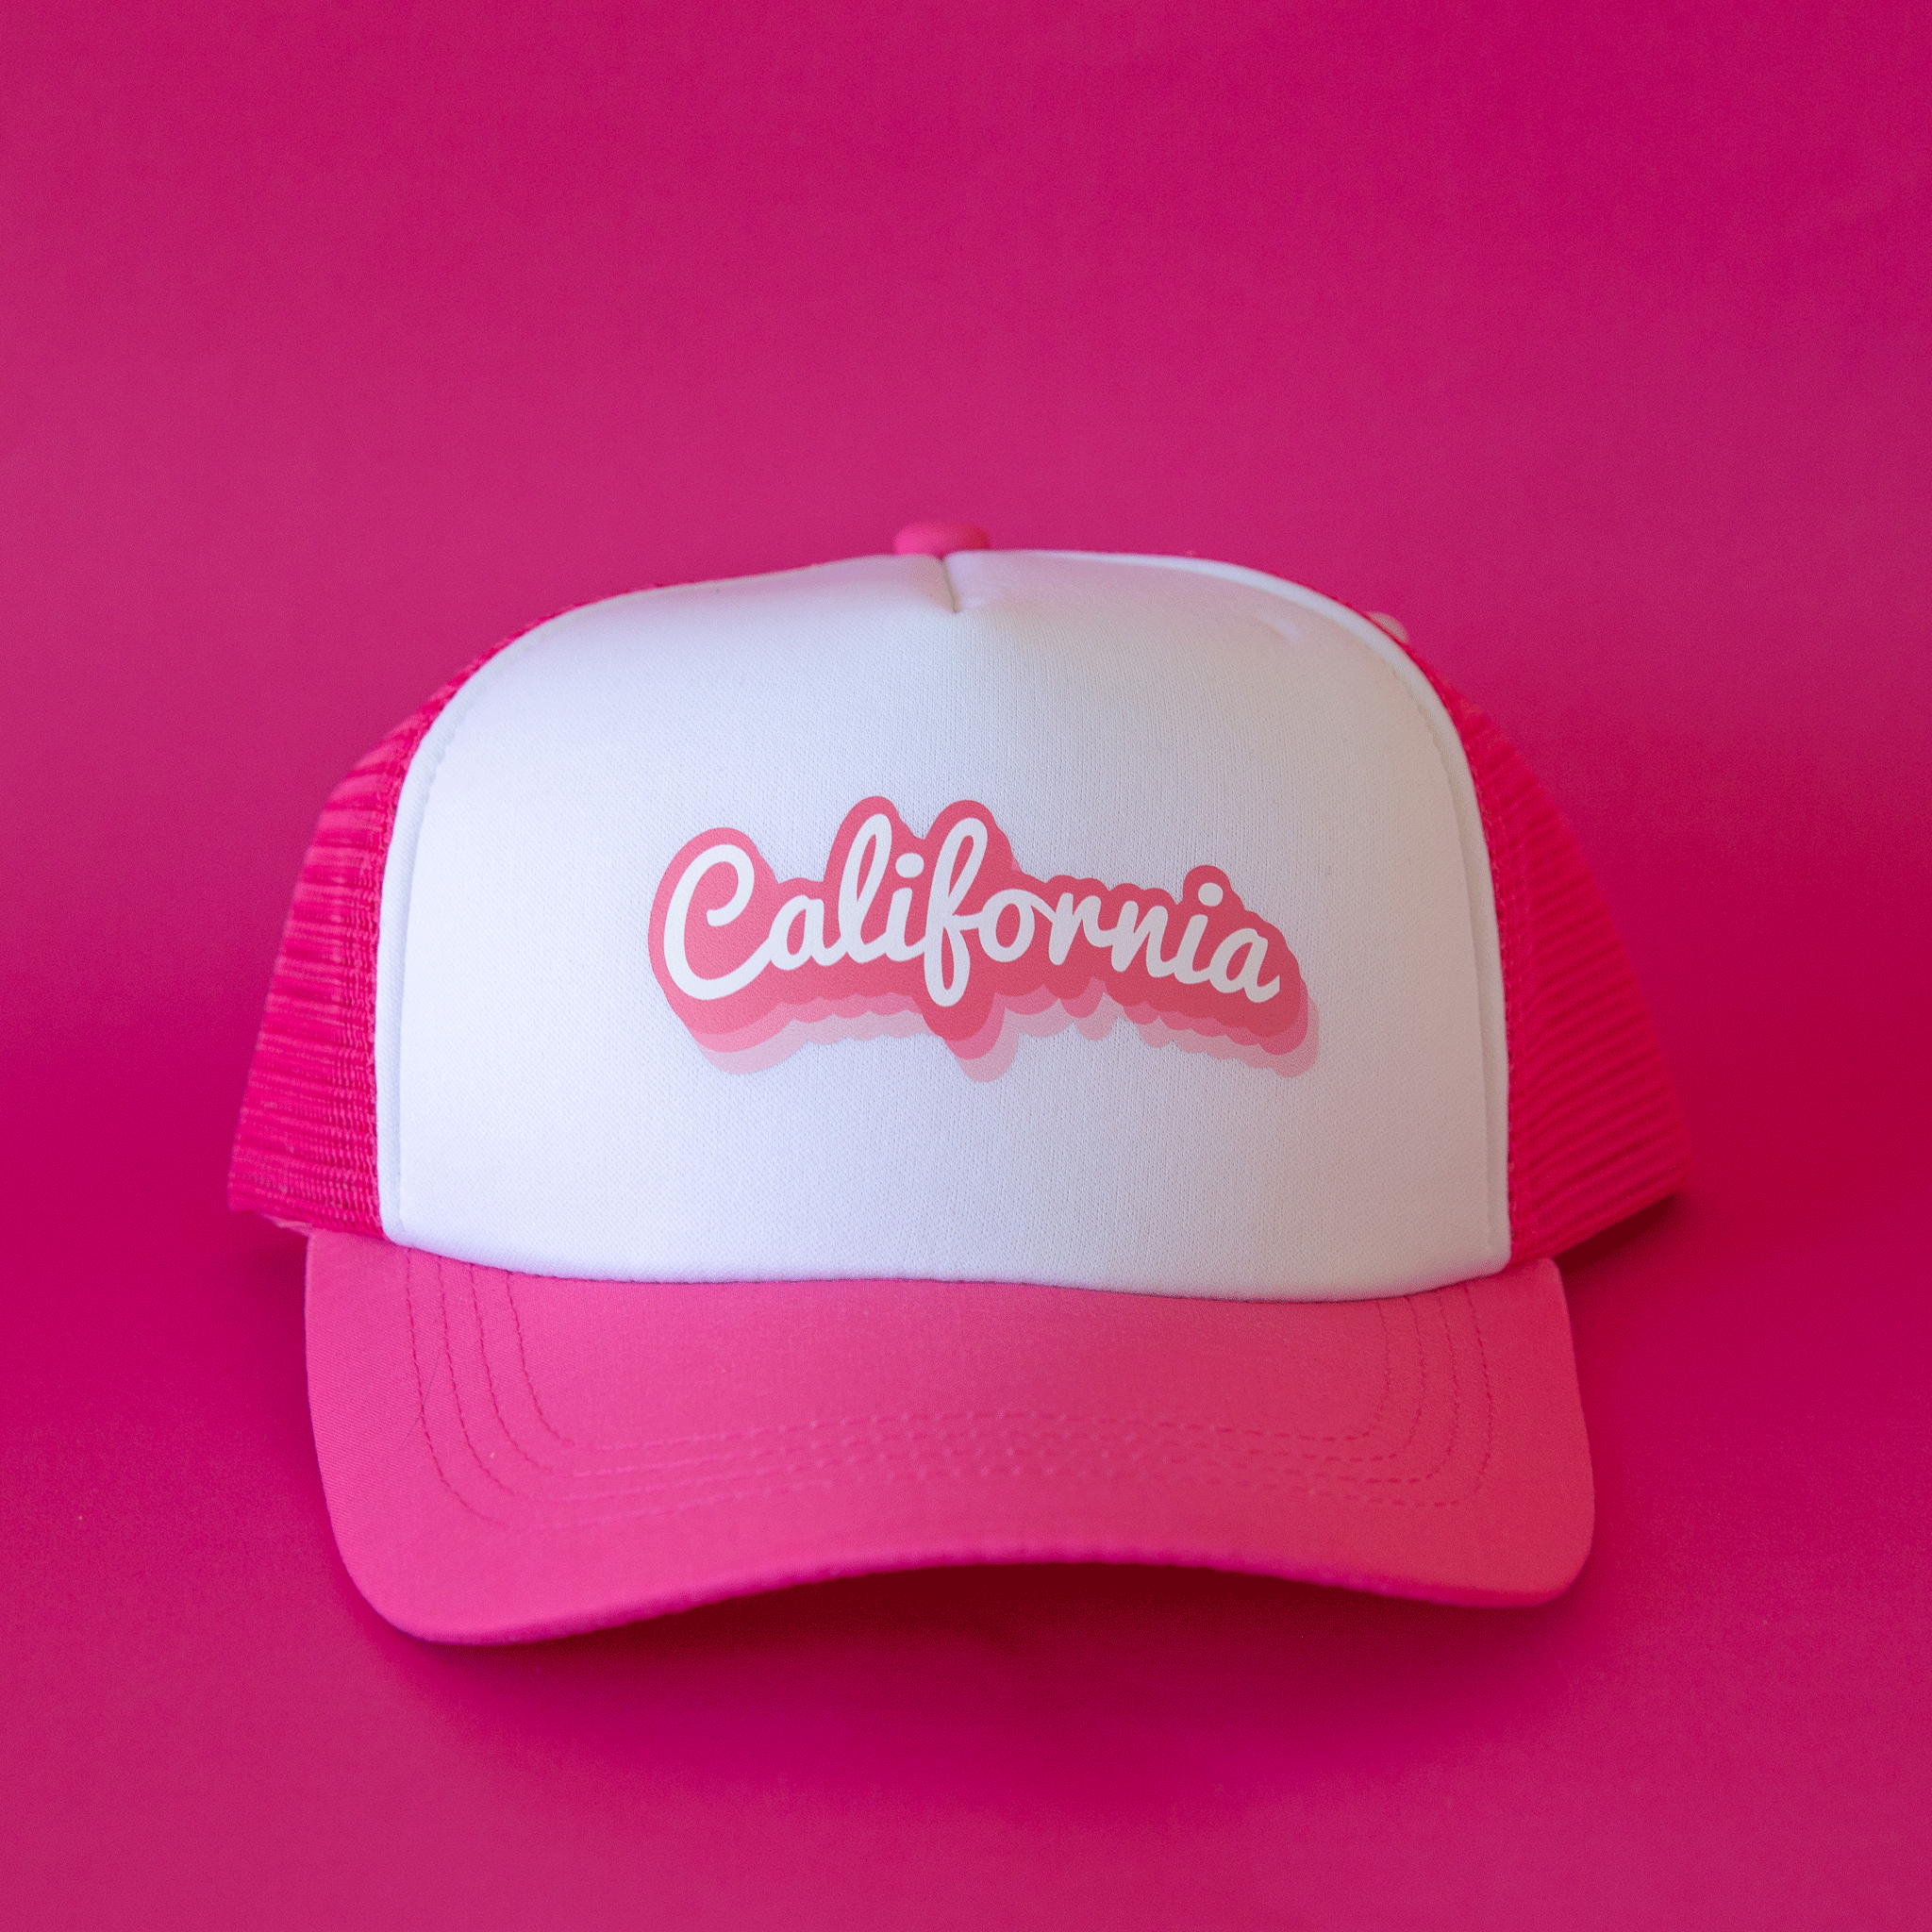 On a hot pink background is a white and hot pink trucker hat with a mesh backing and text across the front that reads, "California".